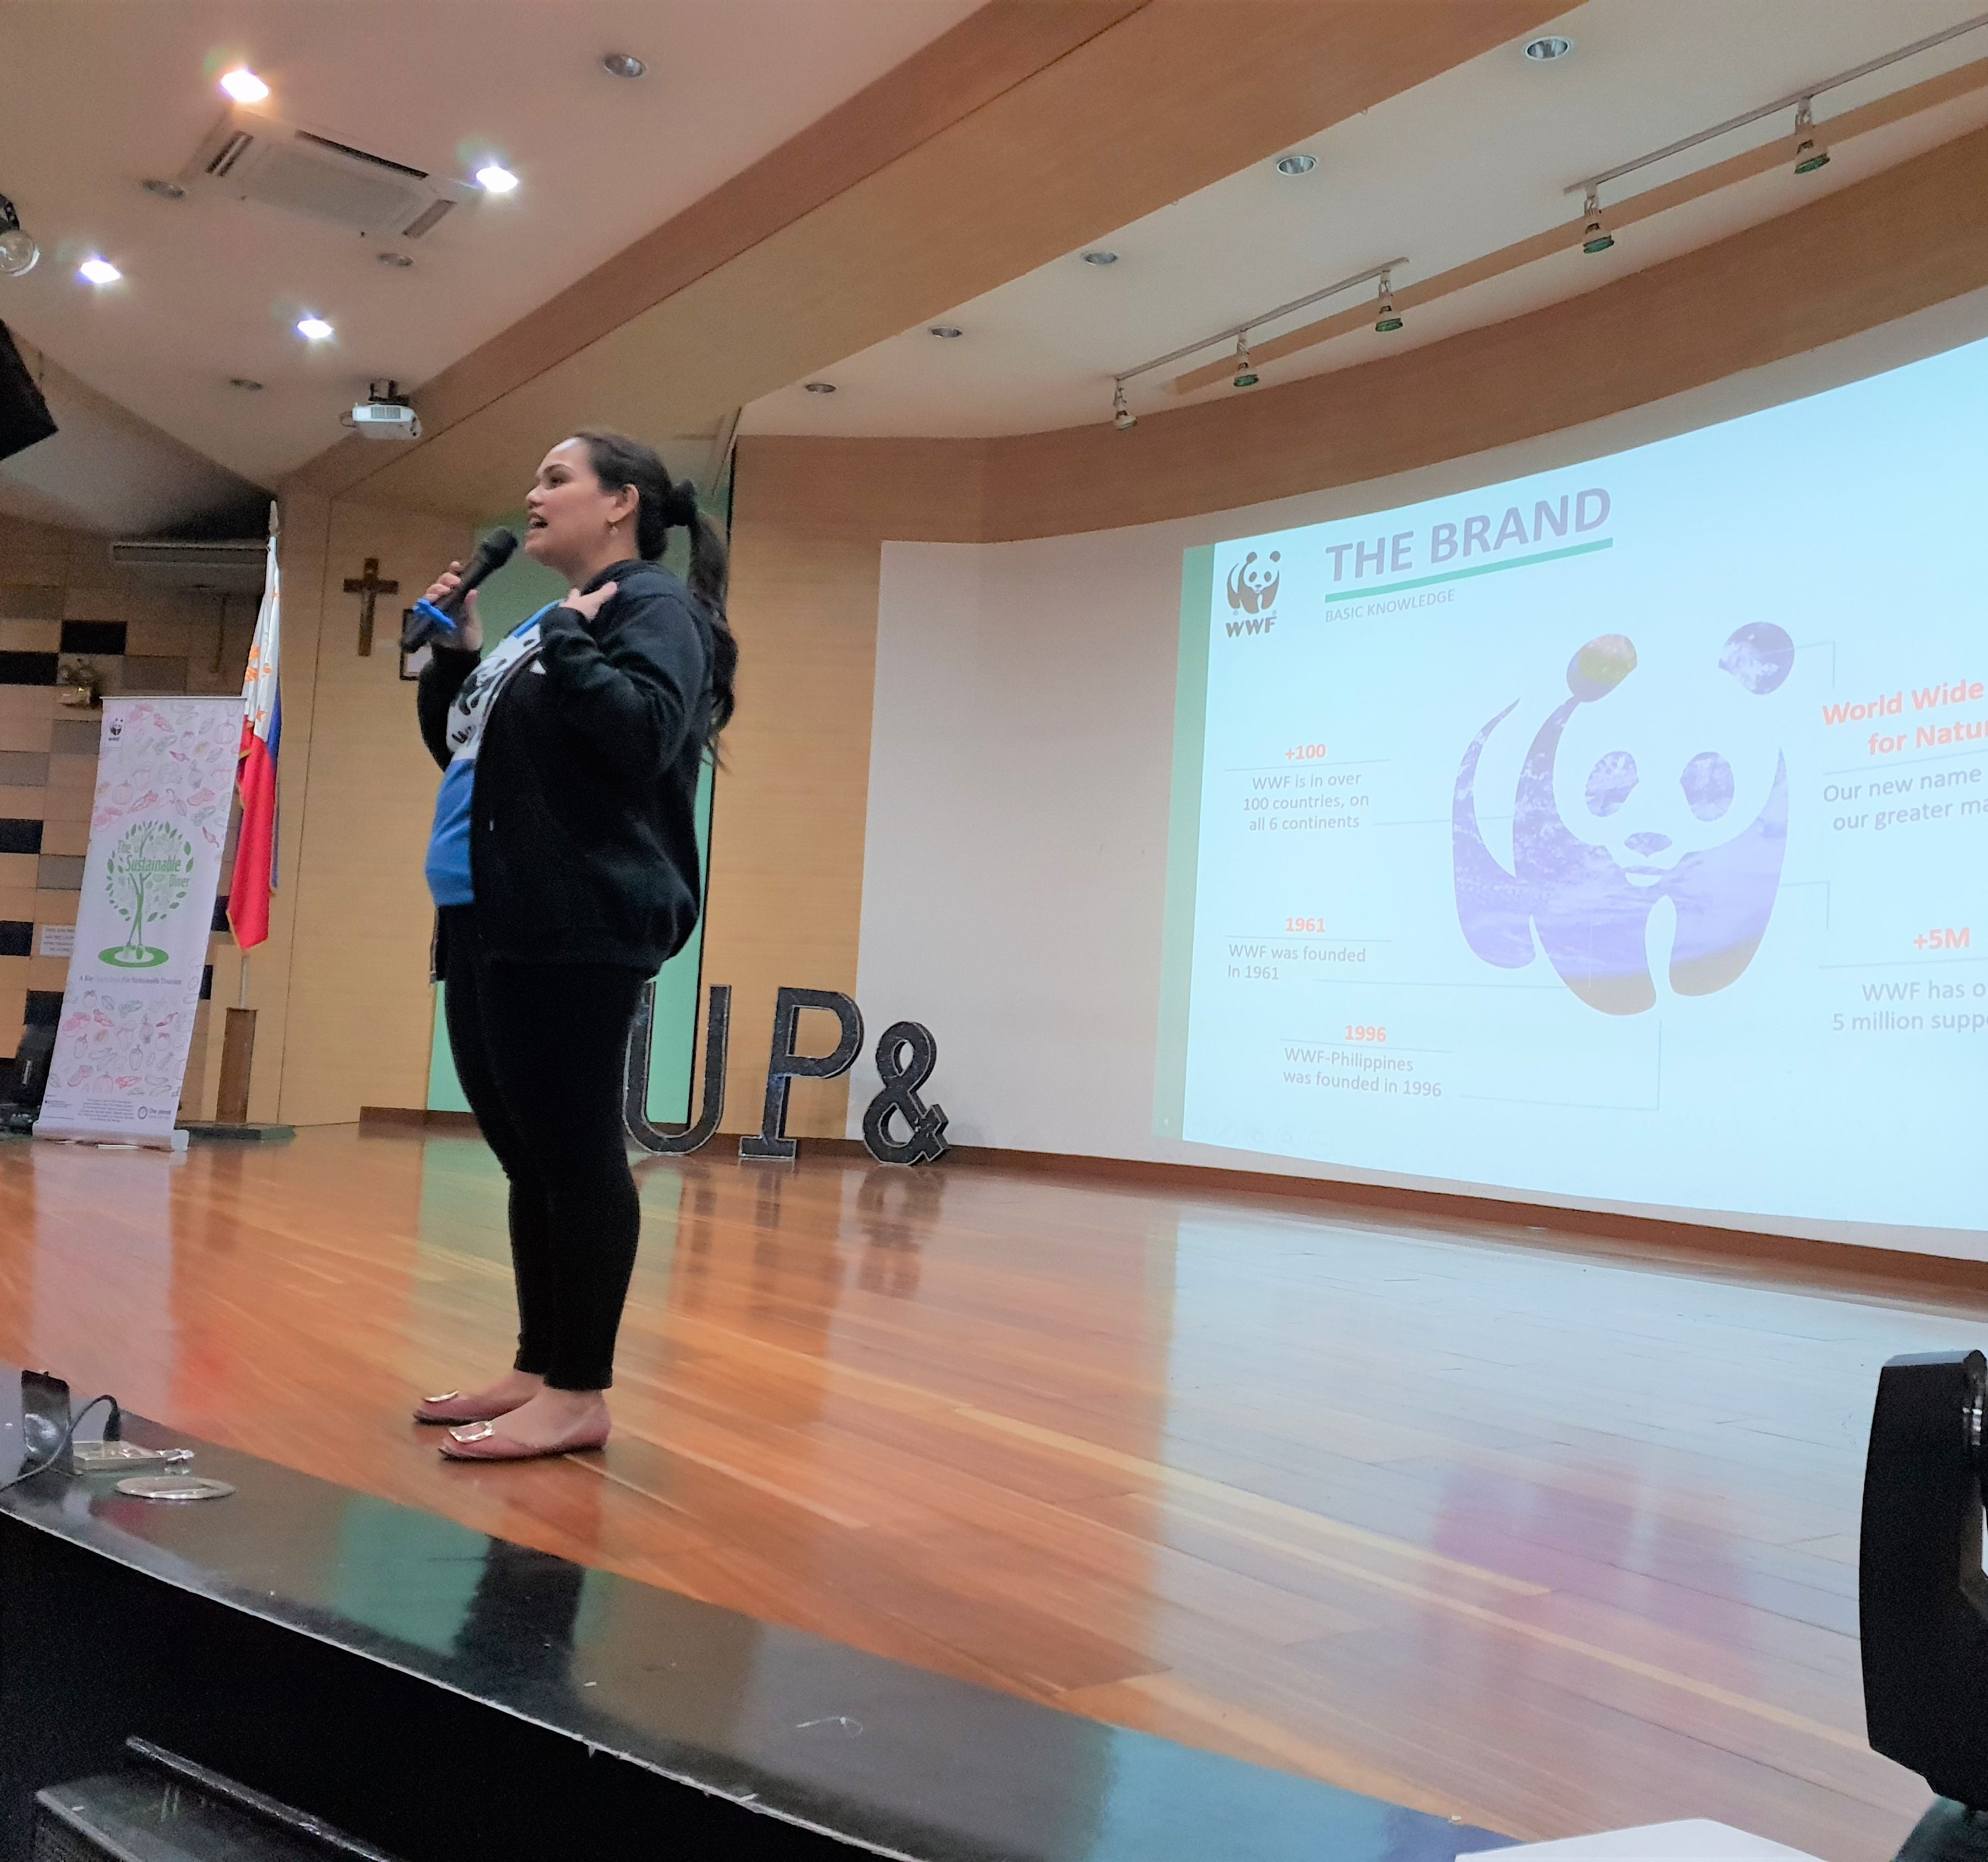 <h1>A Breakthrough for Responsible Tourism</h1>
<p>Last April 4, 2019, representatives from two projects of the World Wide Fund for Nature (WWF) Philippines - The Sustainable Diner: A Key Ingredient for Sustainable Tourism</p>
<p style="text-align: right;"><a href="https://support.wwf.org.ph/what-we-do/food/thesustainablediner/a-breakthrough-for-responsible-tourism/" target="_blank">Read More &gt;</a></p>